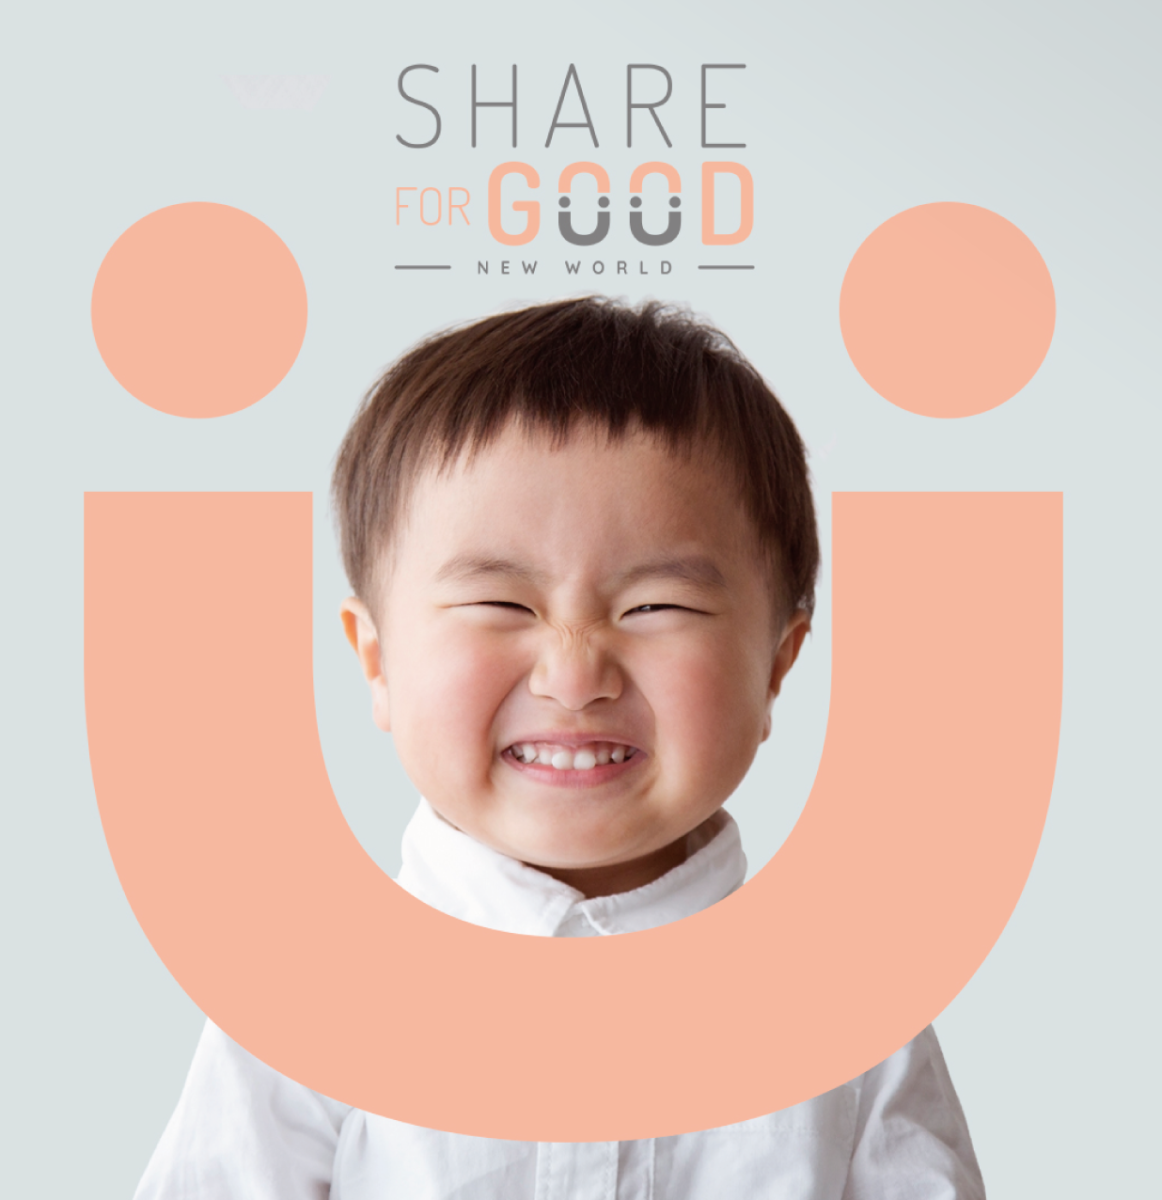 FTLife Fully Supports “Share for Good”